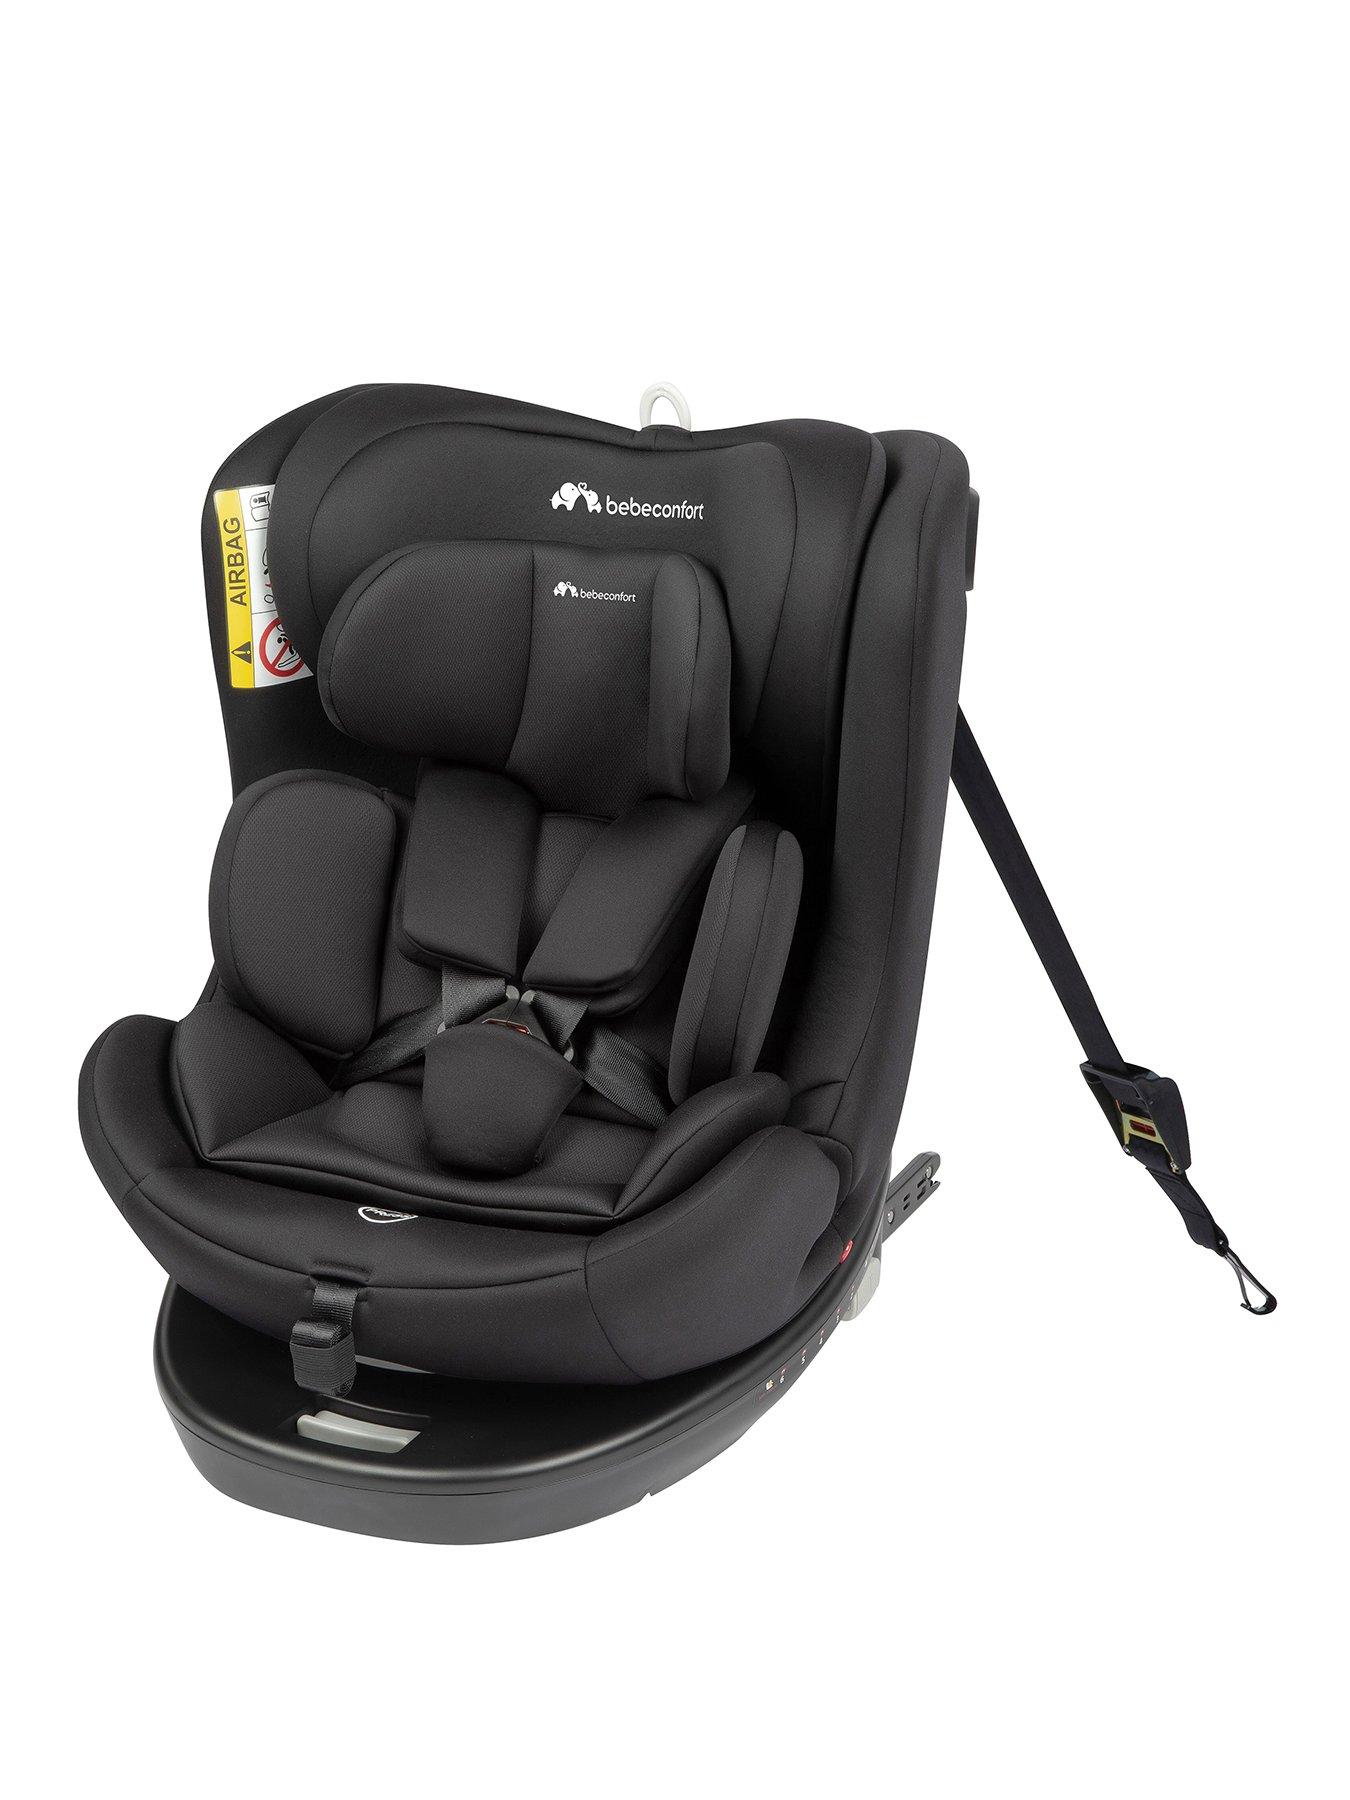 Isofix Compatible, Car seats, Child & baby